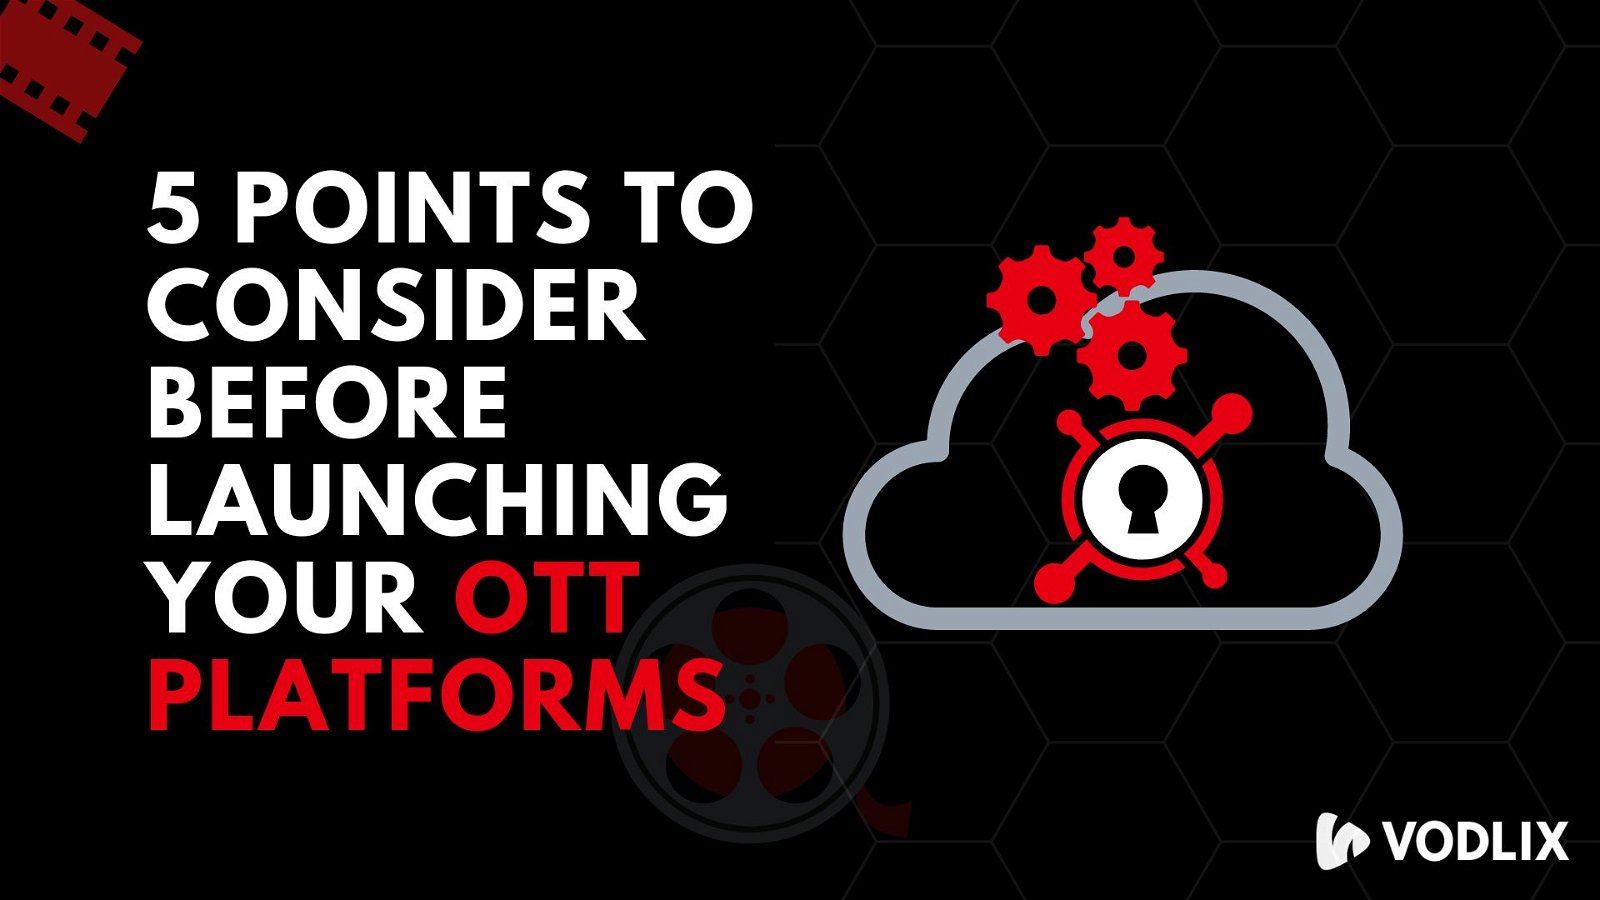 5 Points to Consider before Launching your OTT Platforms